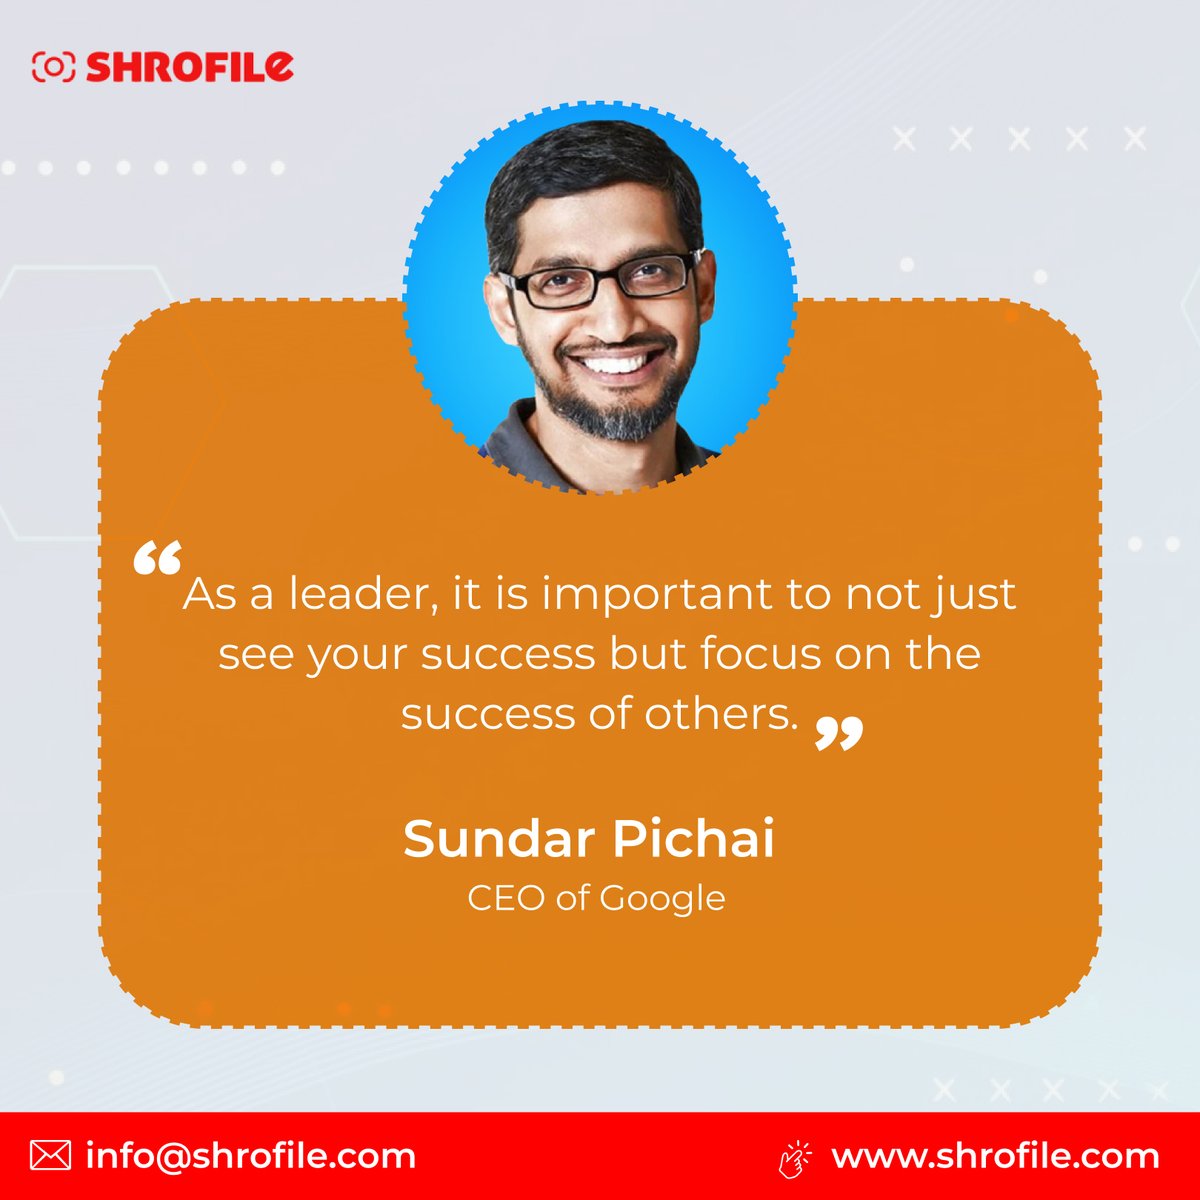 'As a leader, it is important to not just see your success but focus on the success of others.'

Sundar Pichai - CEO of Google

shrofile.com

#LeadershipWisdom #SuccessTogether #SundarSpeaks #TeamTriumph #LeadershipBeyondSelf #EmpowerOthers #CollectiveSuccess